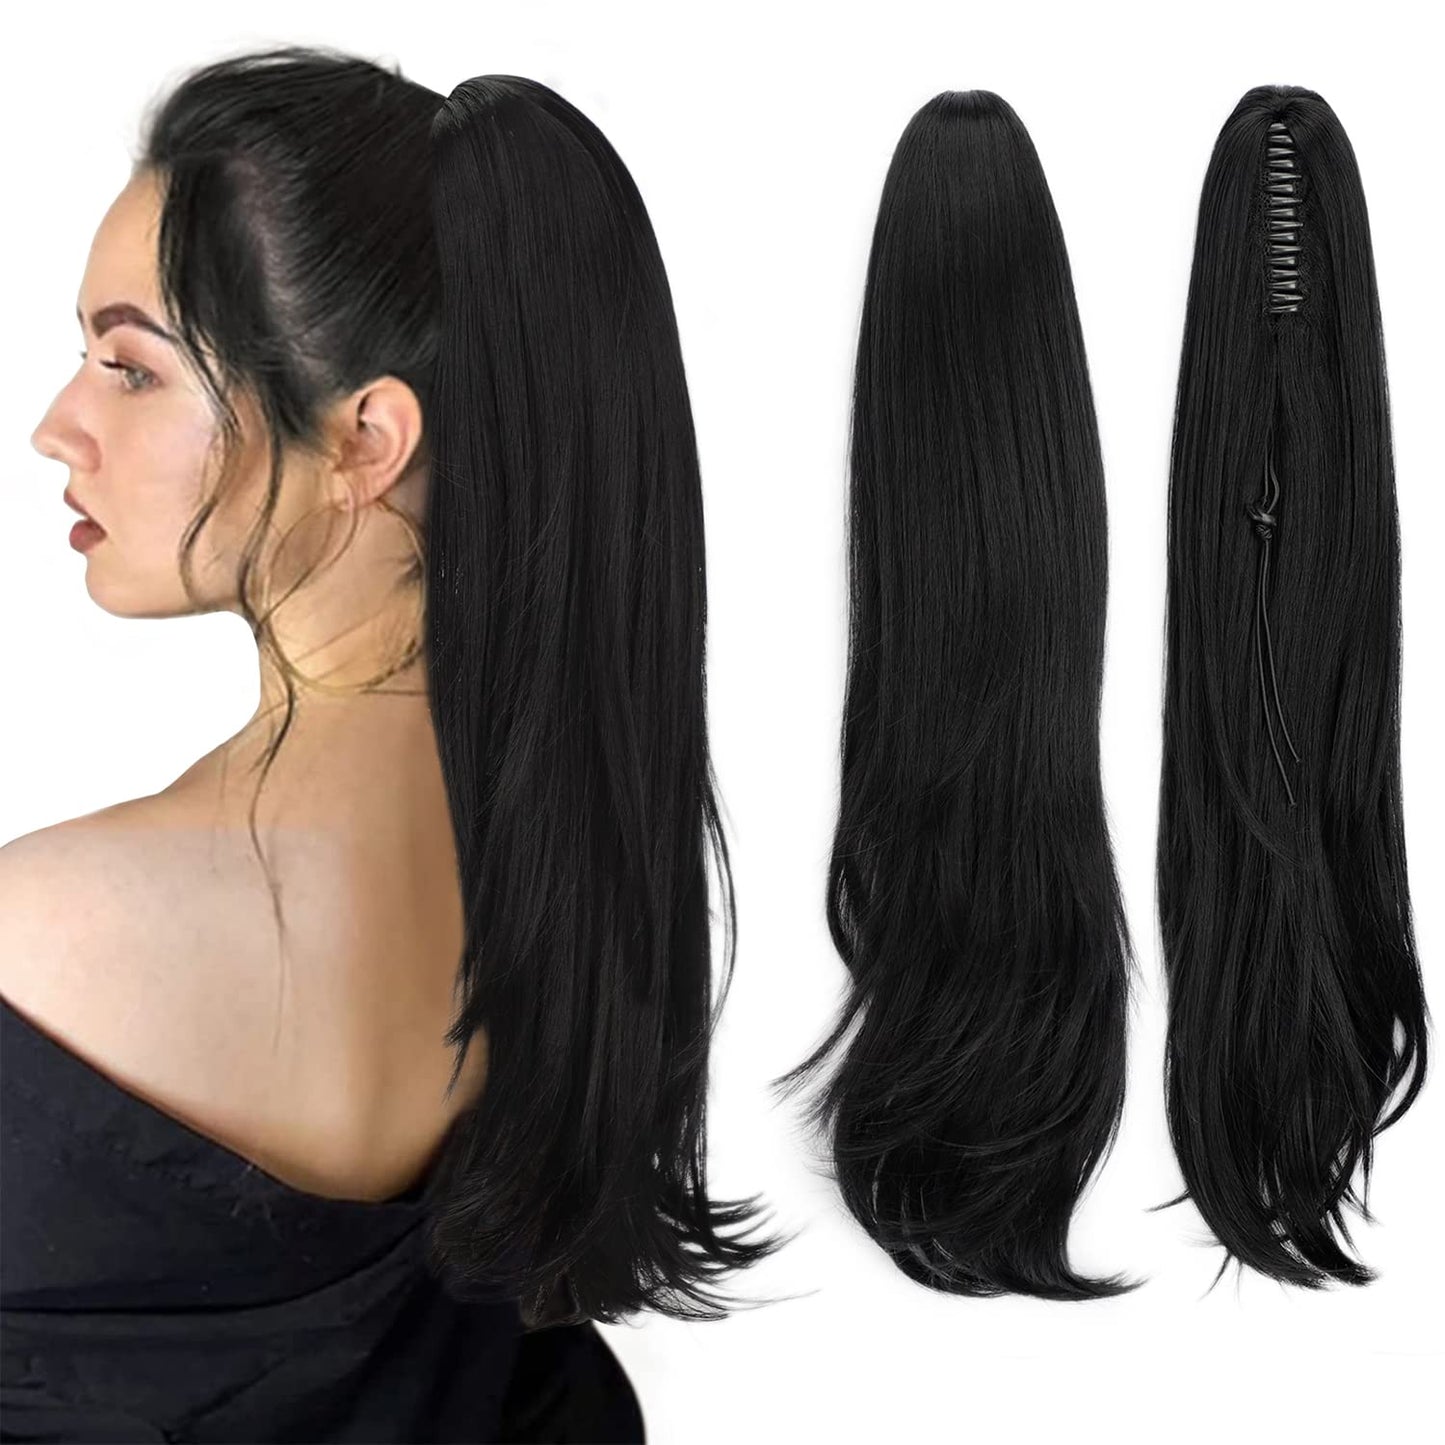 Lush Locks Ponytail Extension Long Wavy With Claw Clip